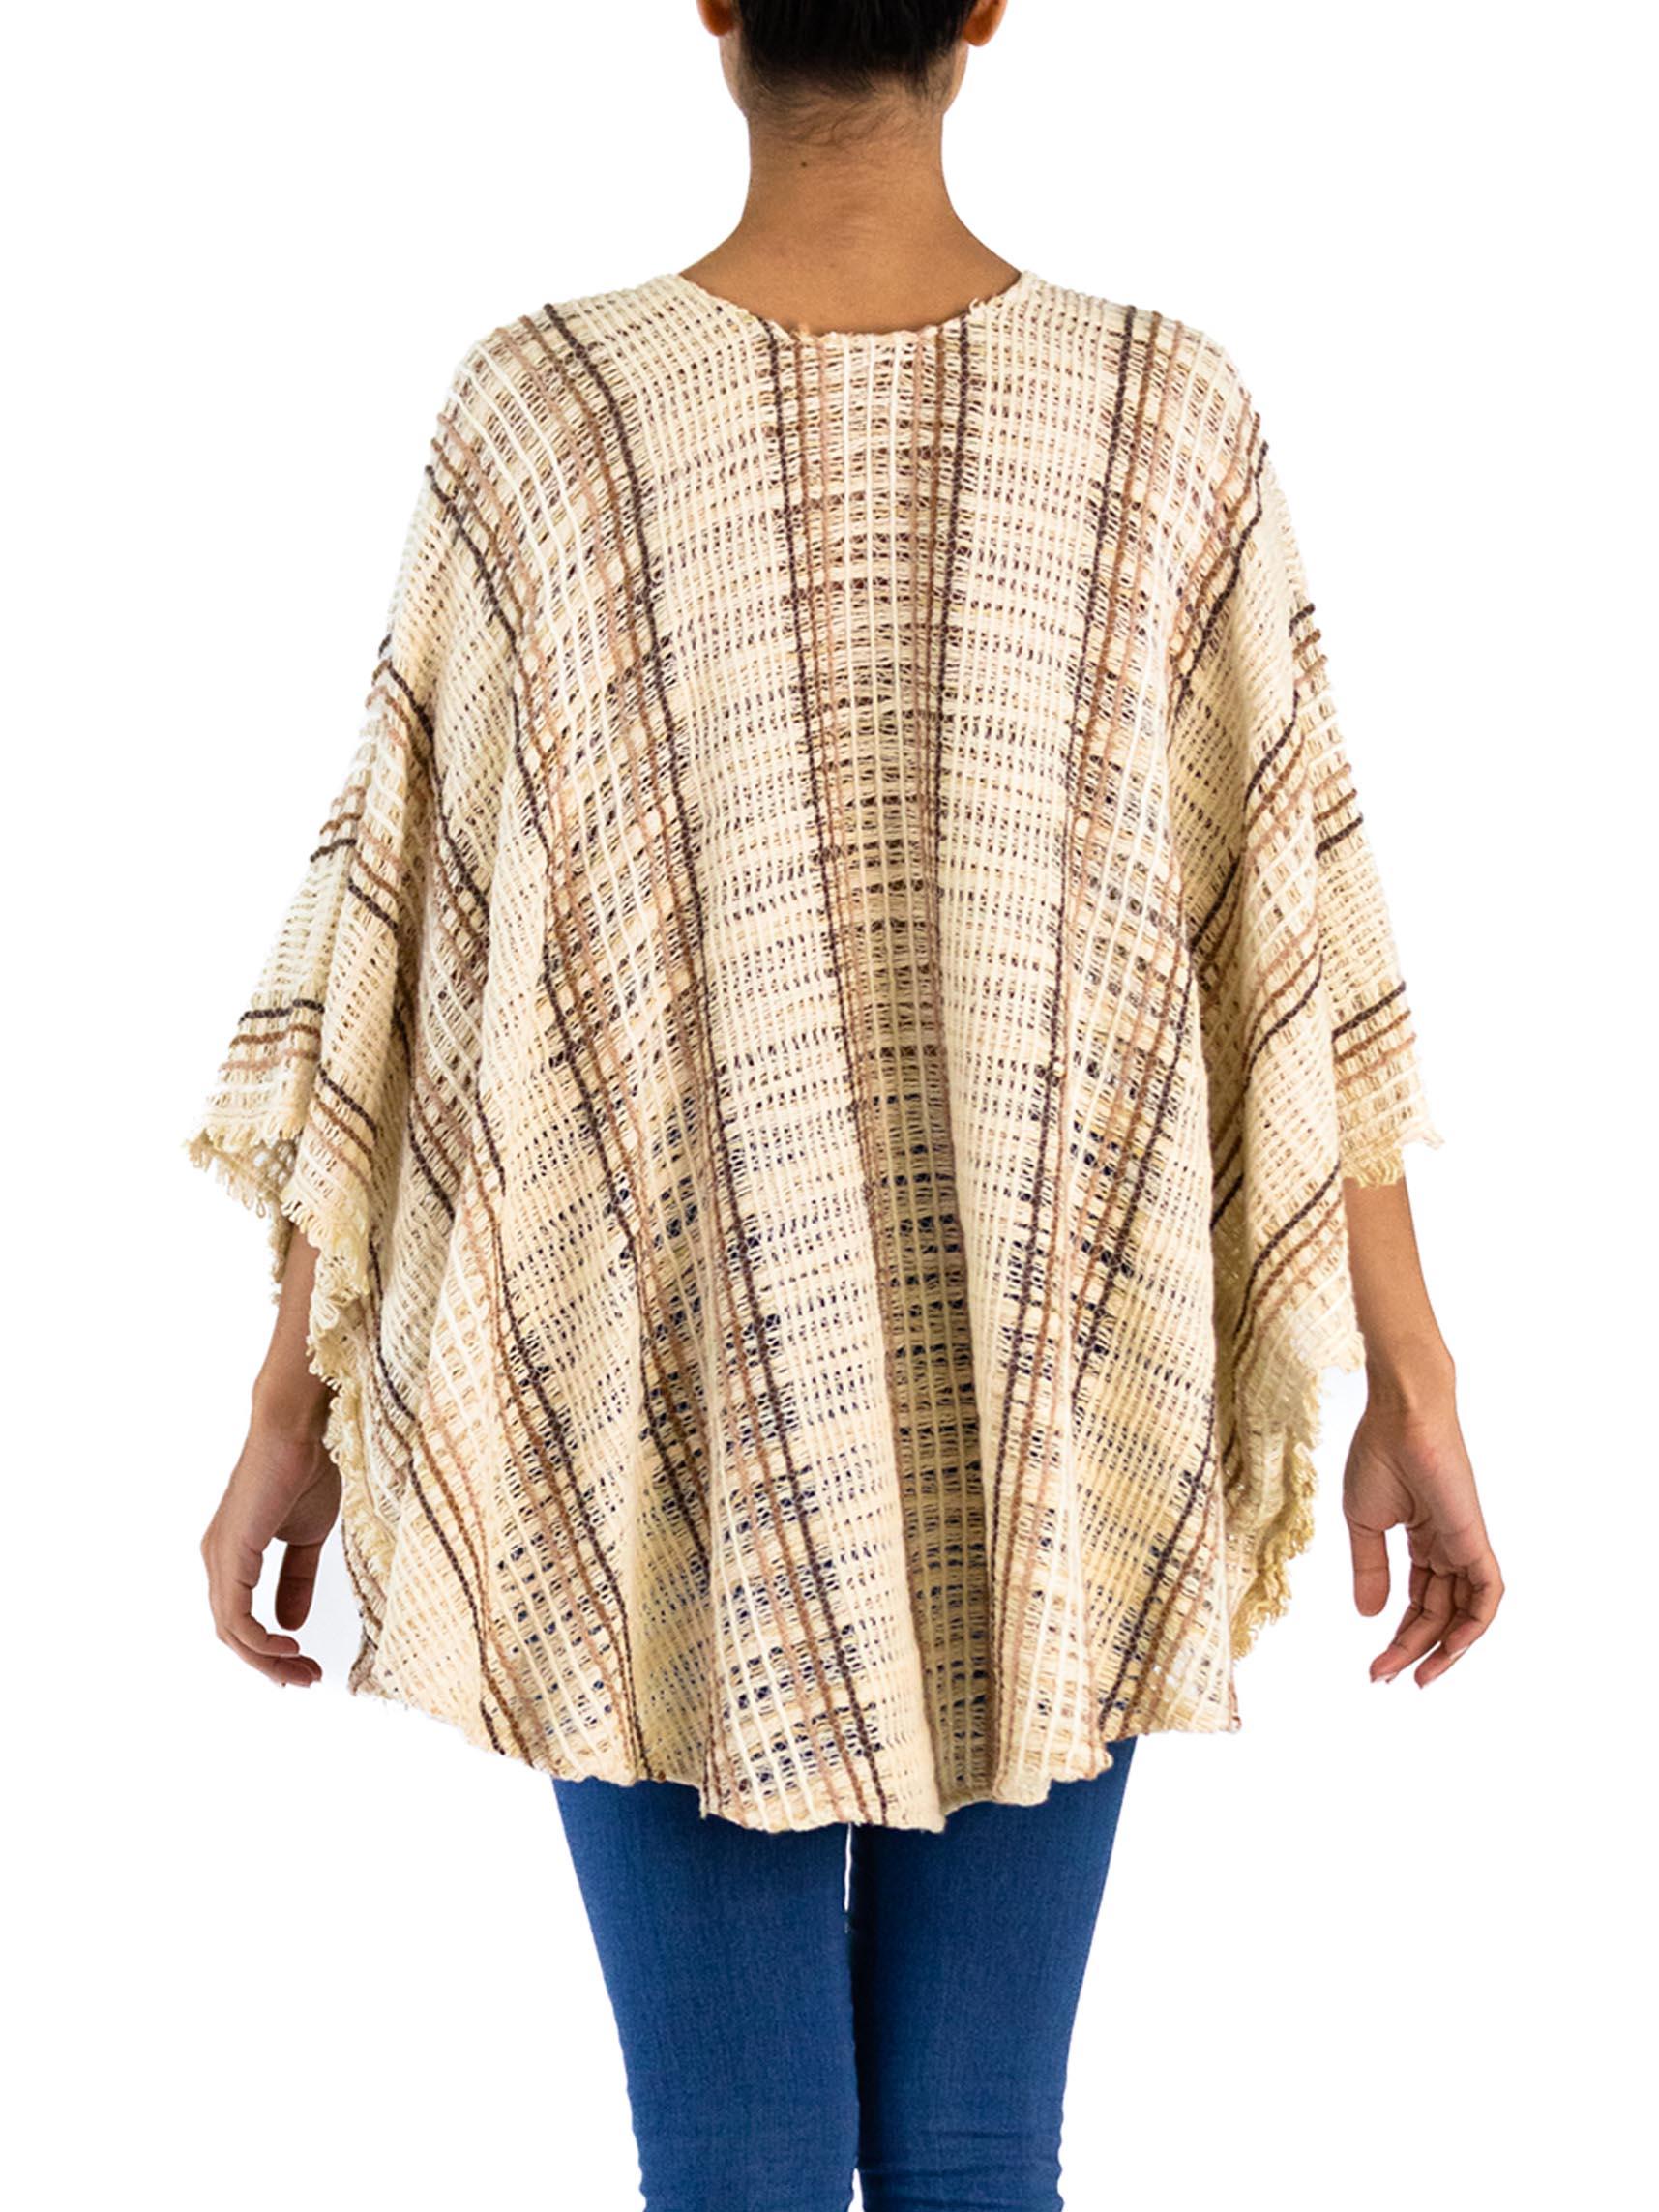 1970S Brown & Cream Cotton Blend Open Weave Tunic Top For Sale 6